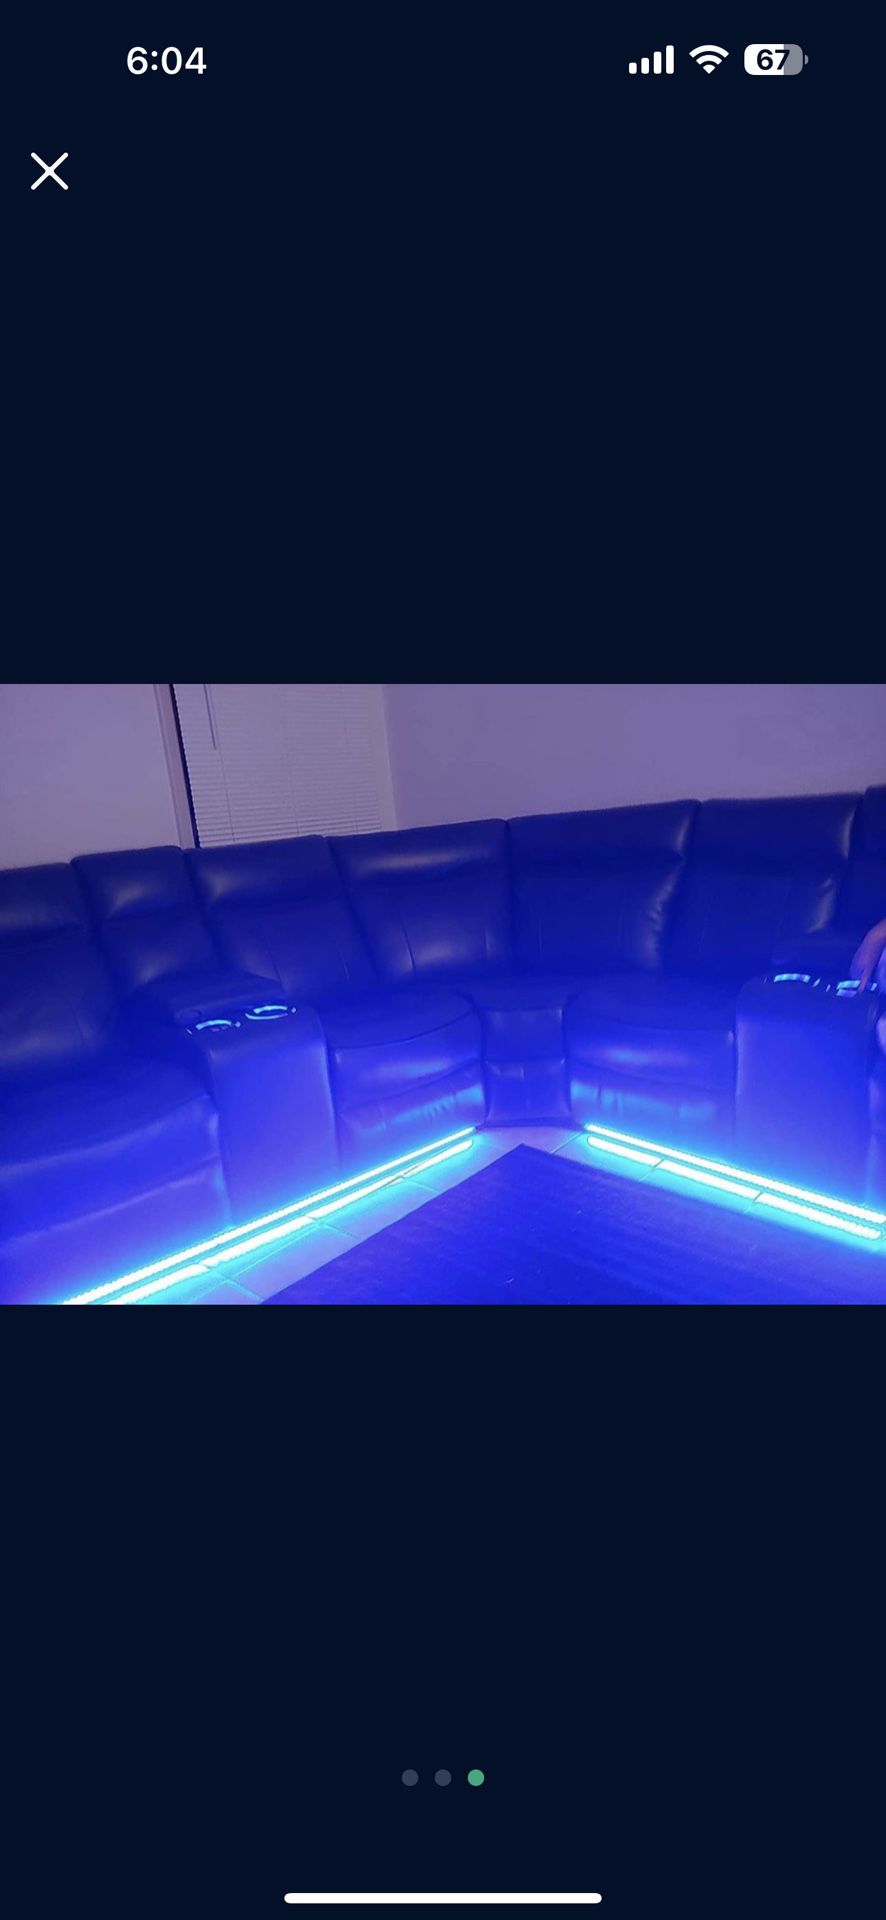 Faux Leather Sectional Couch With Led Lights And  USB Charging 